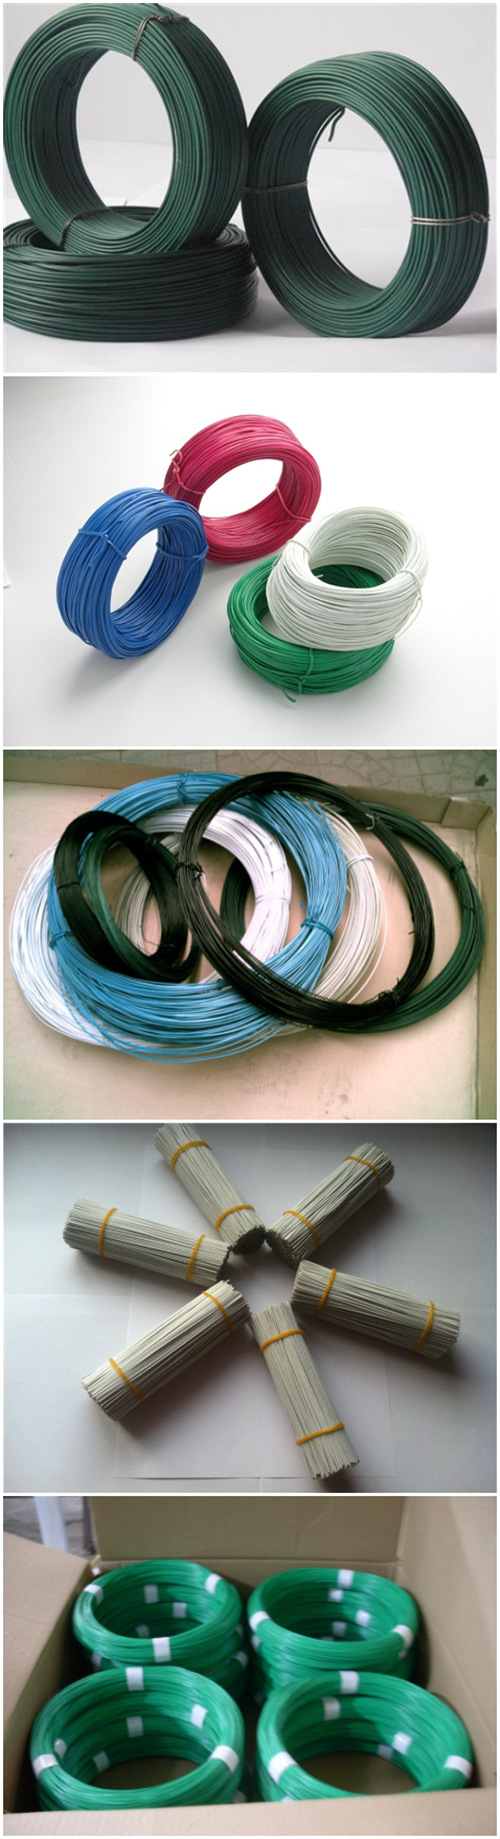 2016 Hot Sale PVC Coated Wire Made in China